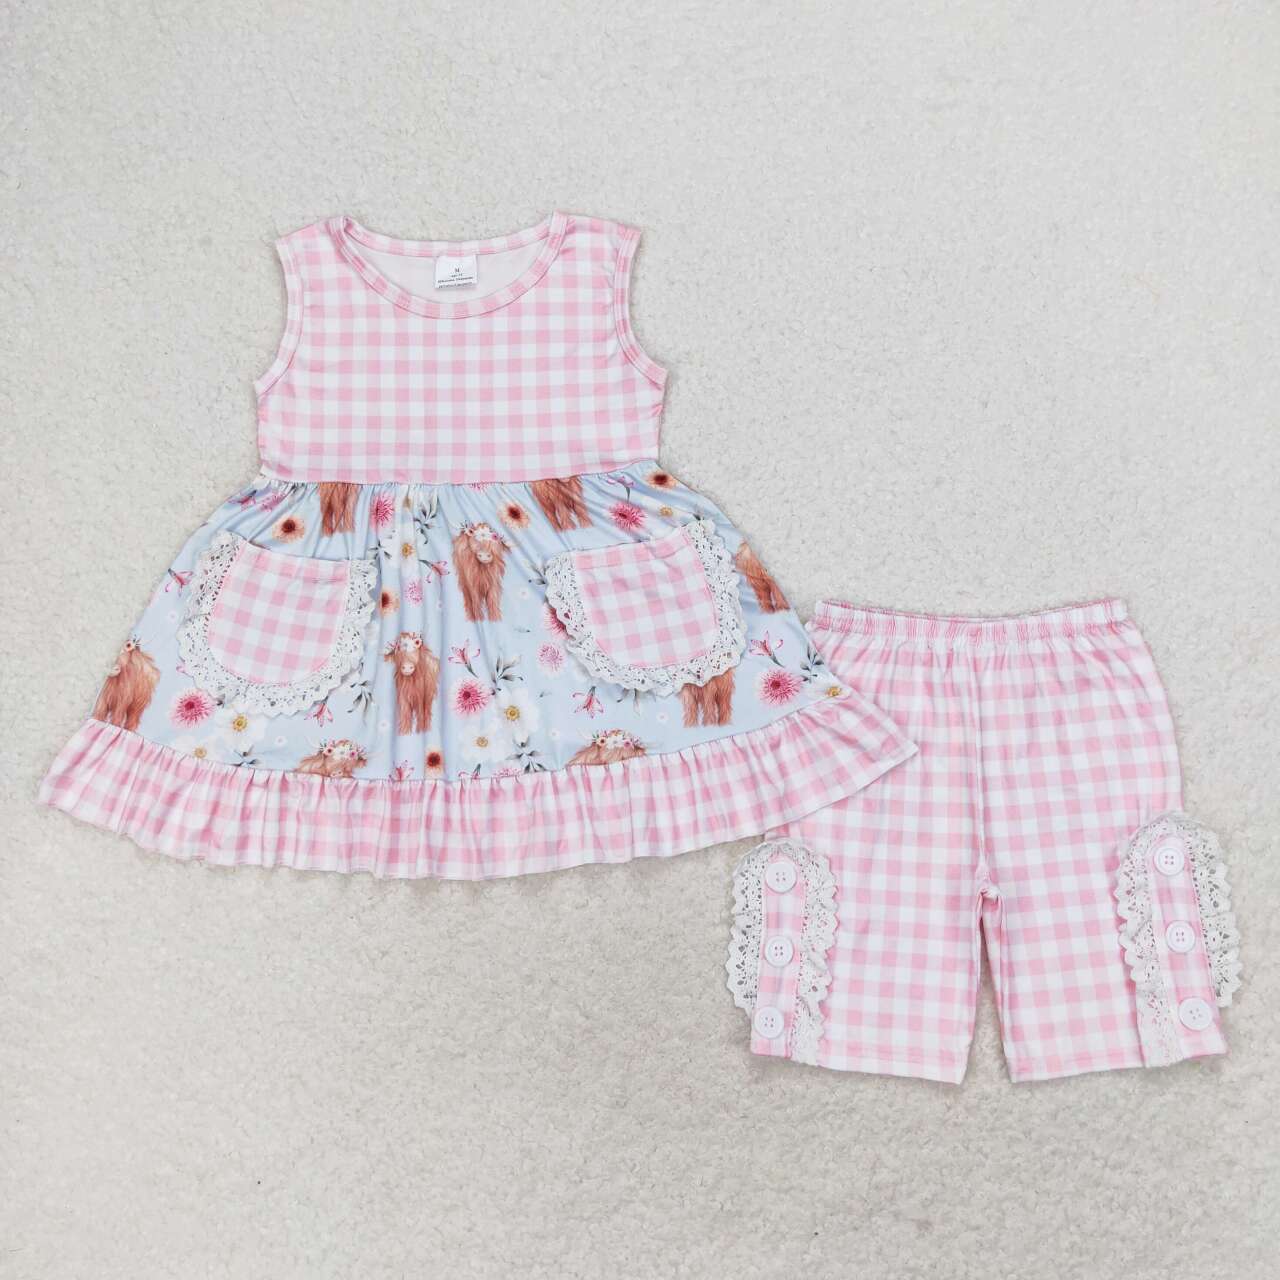 RTS no moq  GSSO1161  Kids Girls summer clothes sleeves top with shorts set